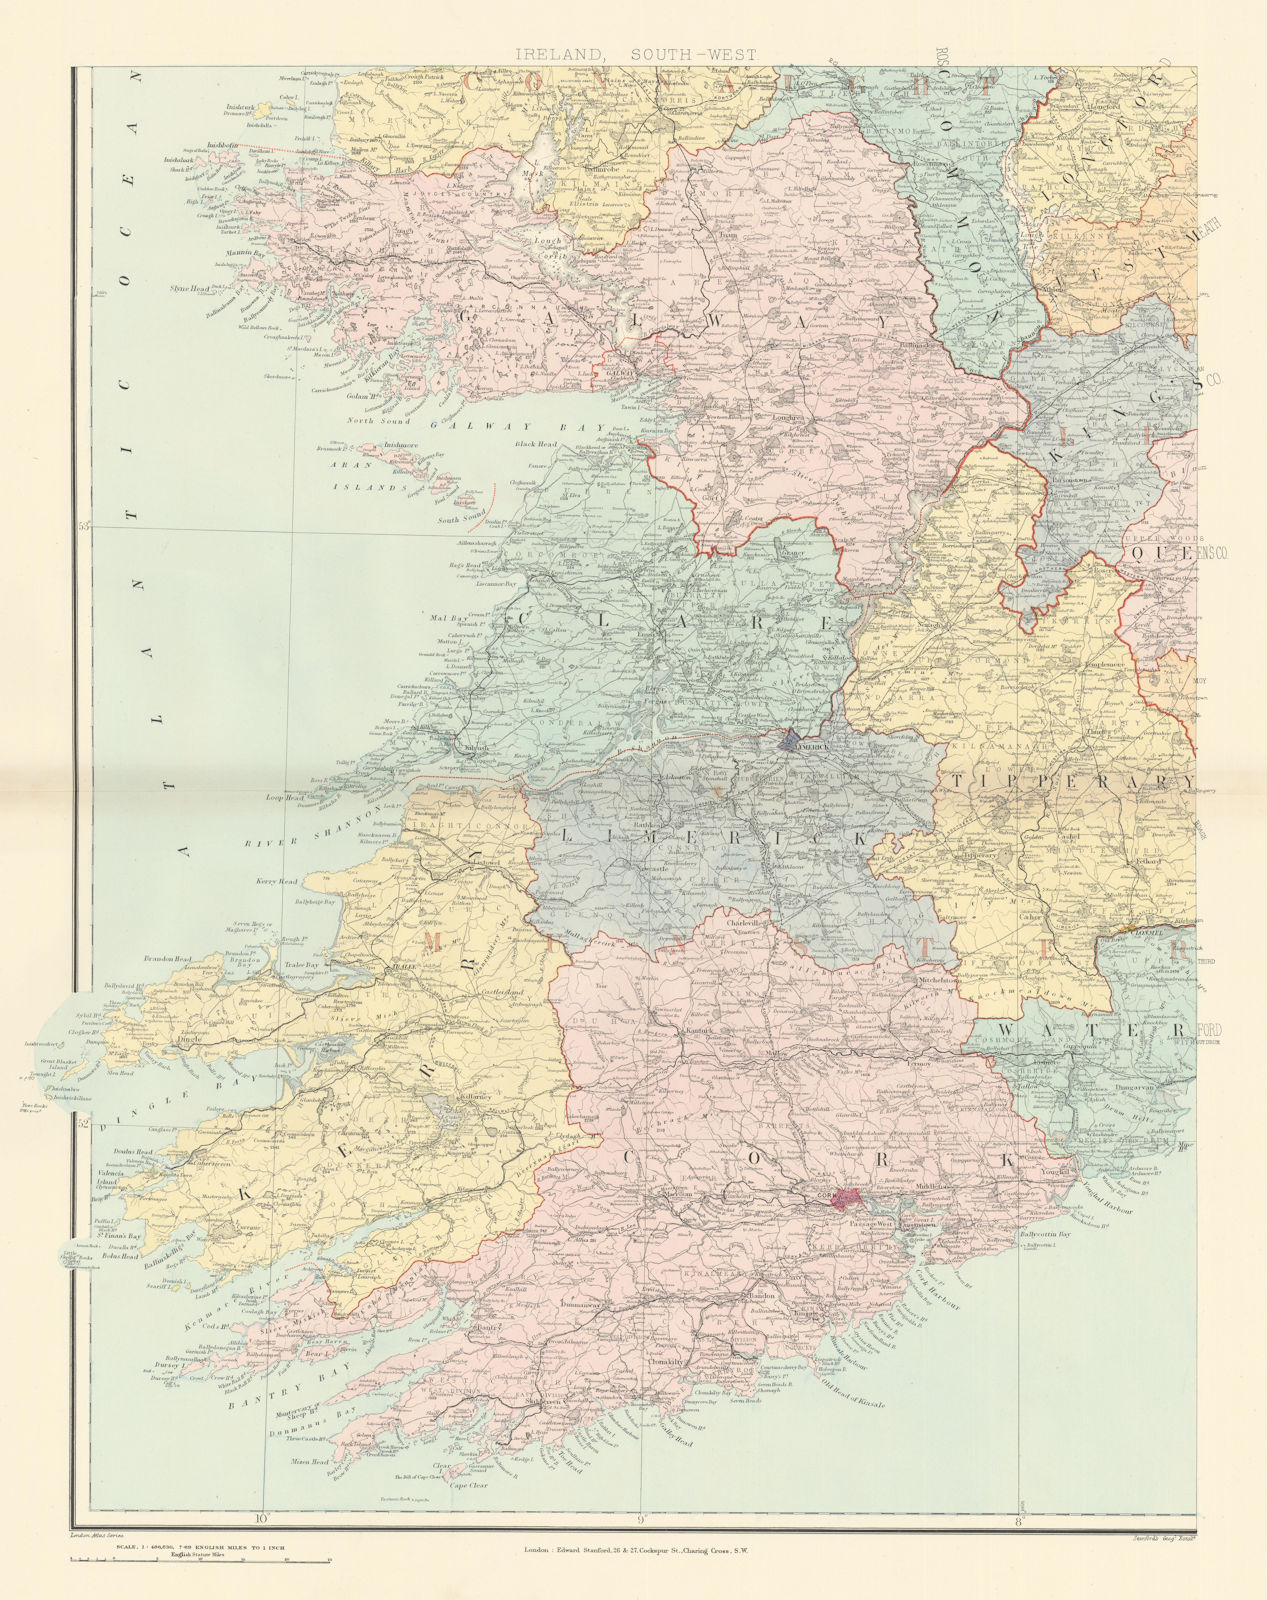 Ireland south-west Munster Kerry Limerick Cork Clare Limerick. STANFORD 1896 map